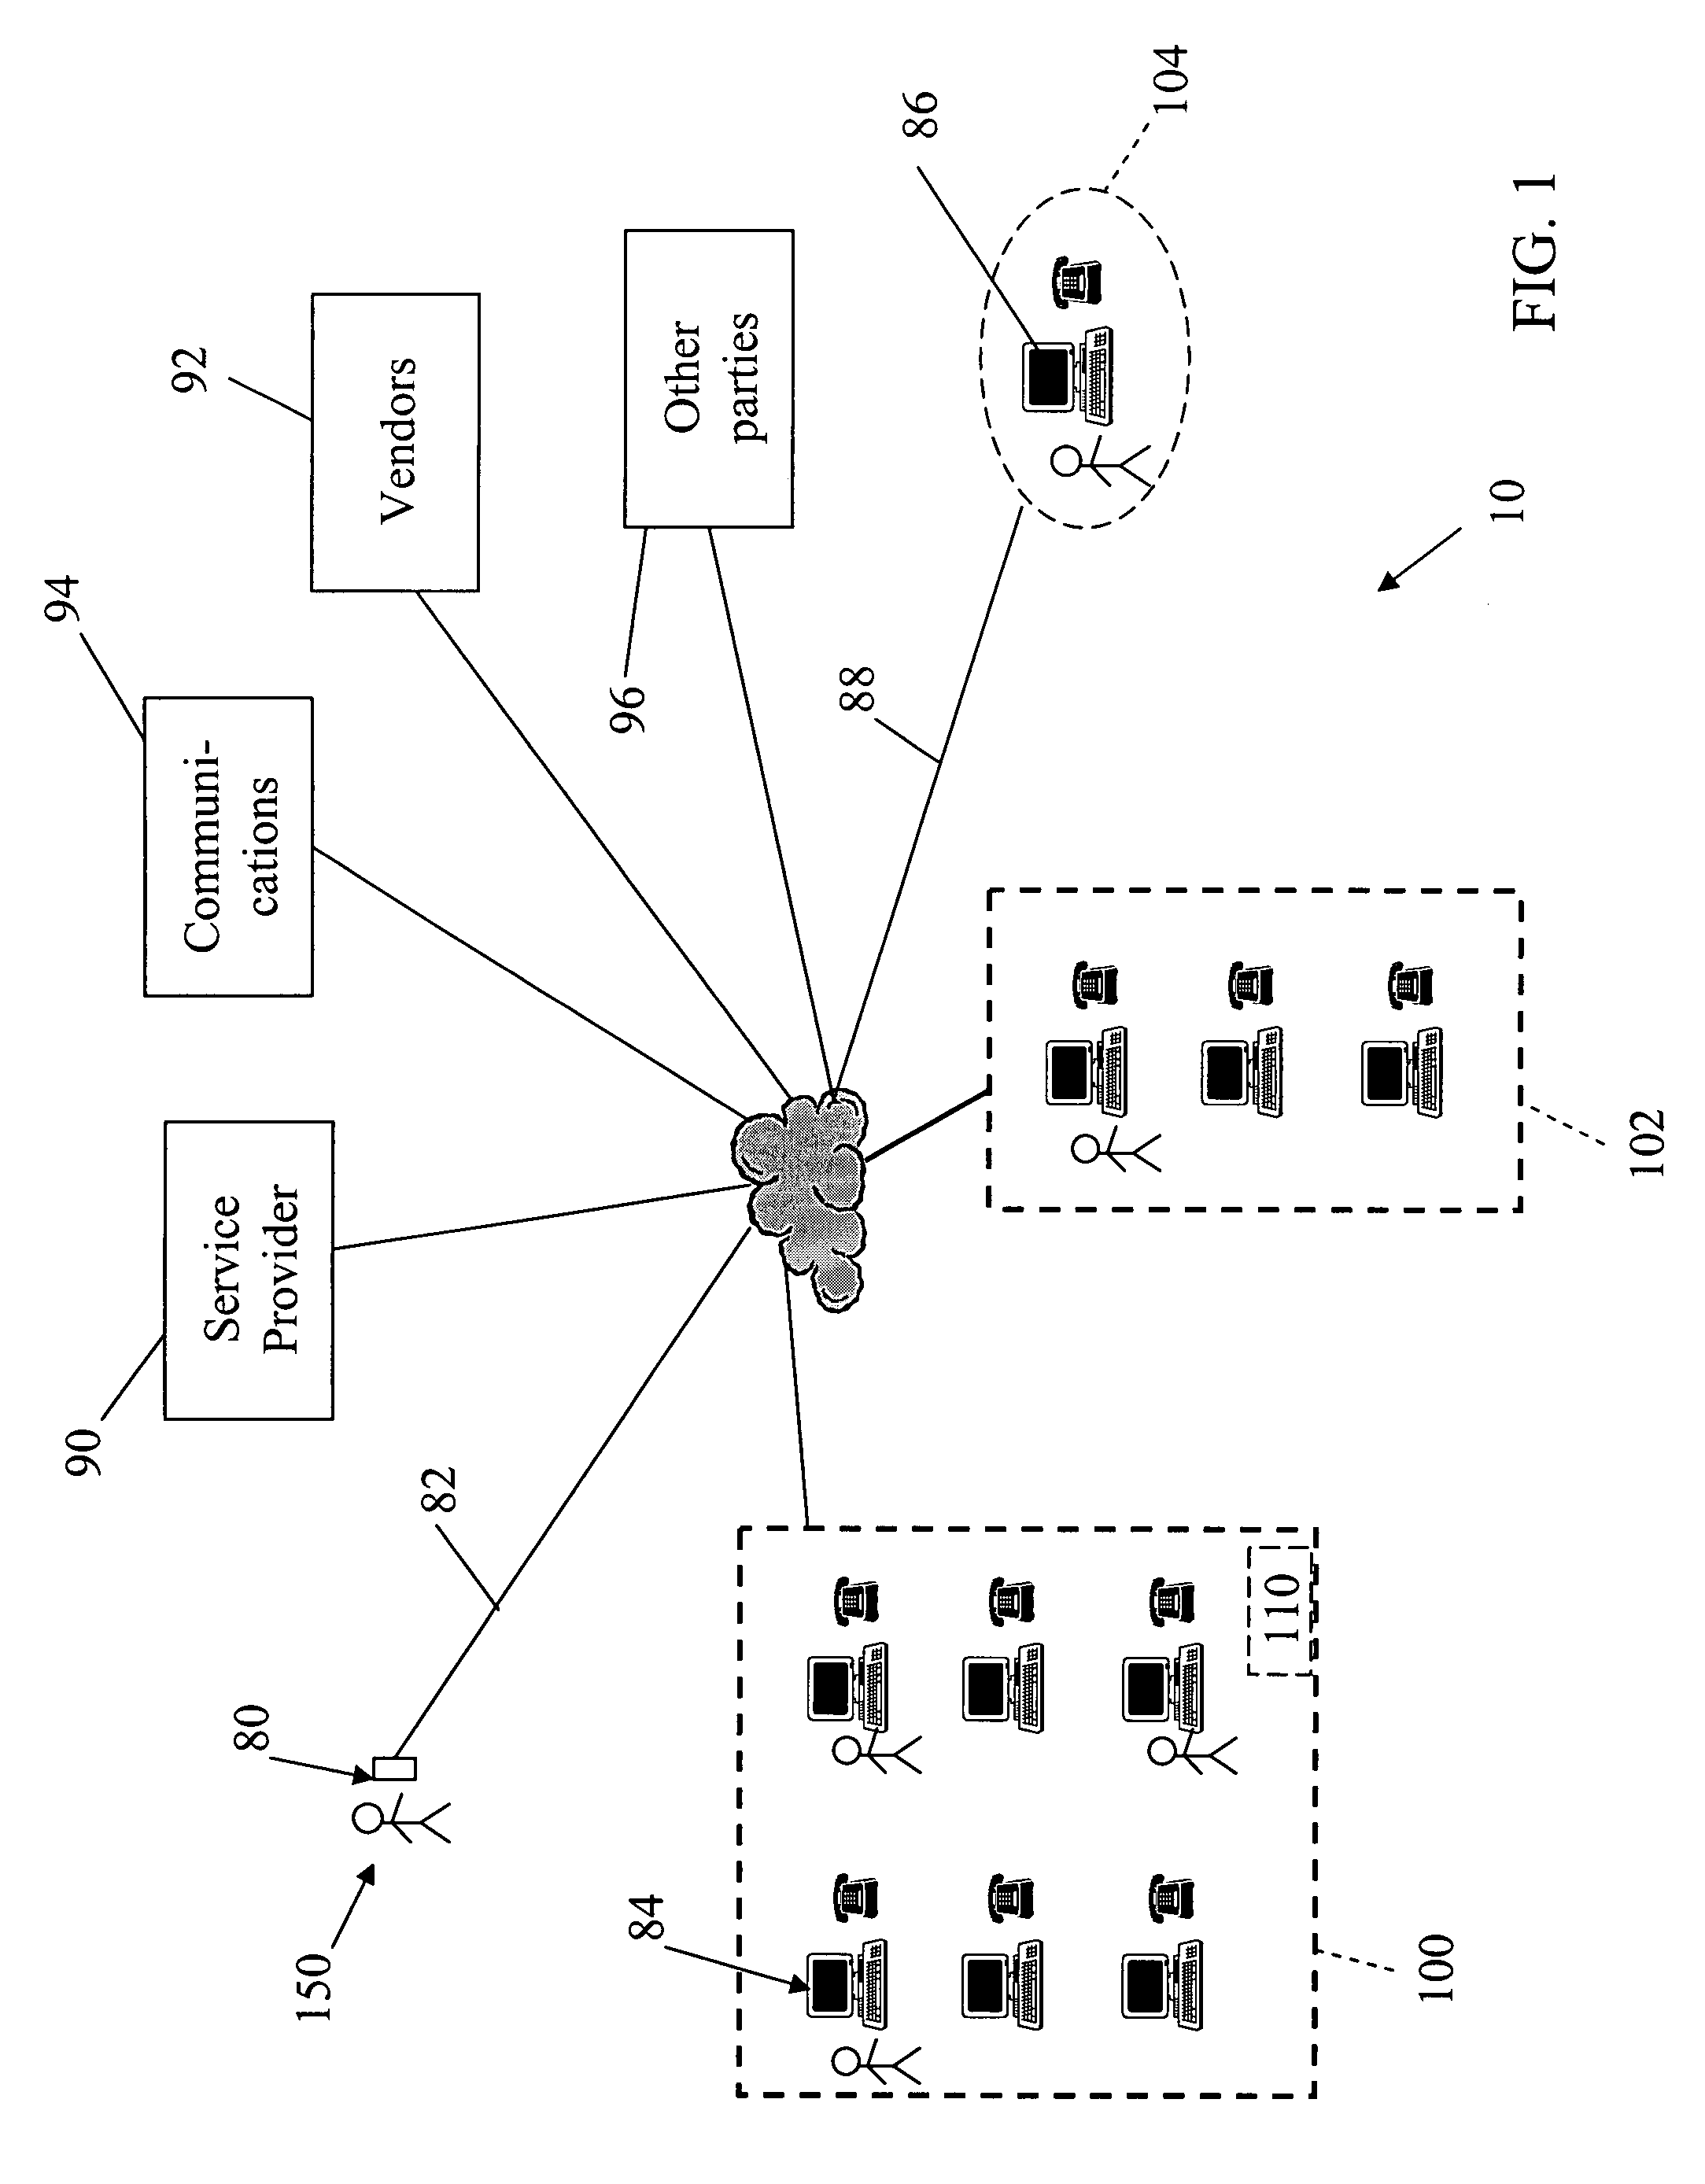 System and method for managing workplace real estate and other resources